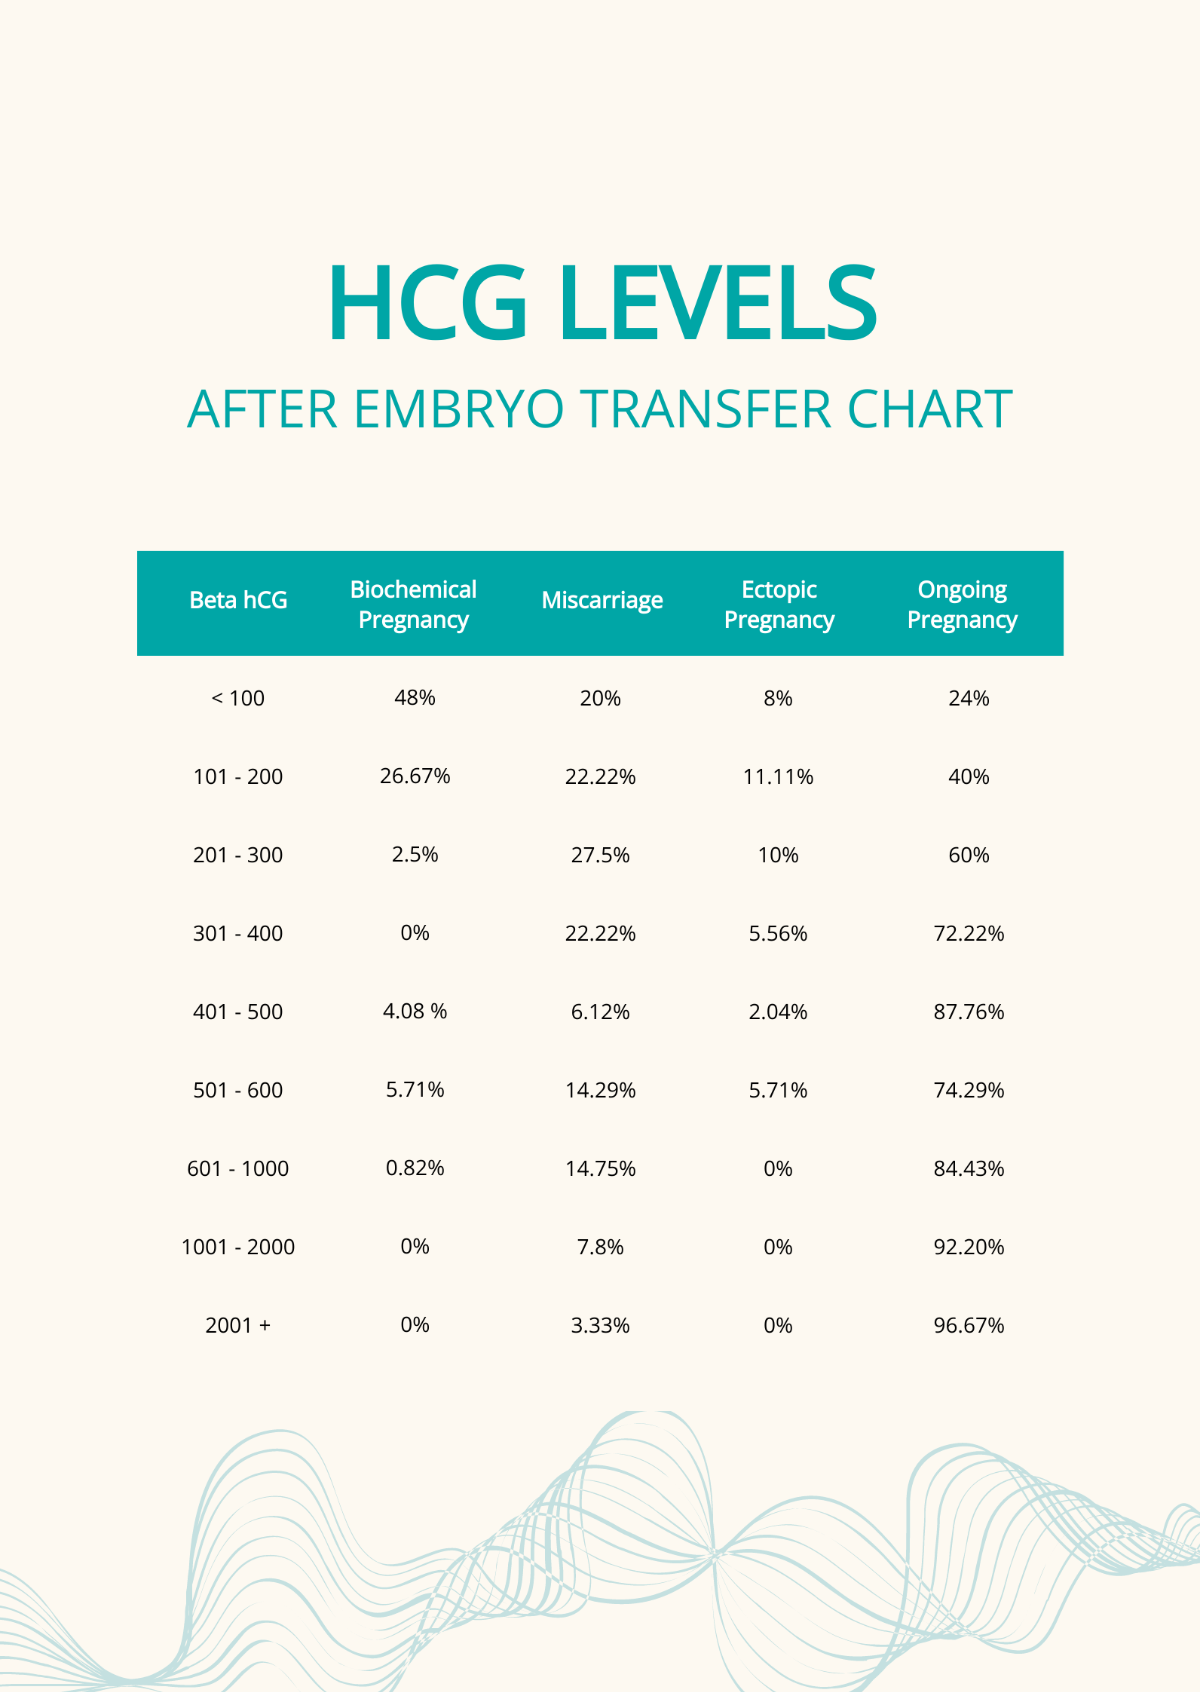 HCG Levels After Embryo Transfer Chart